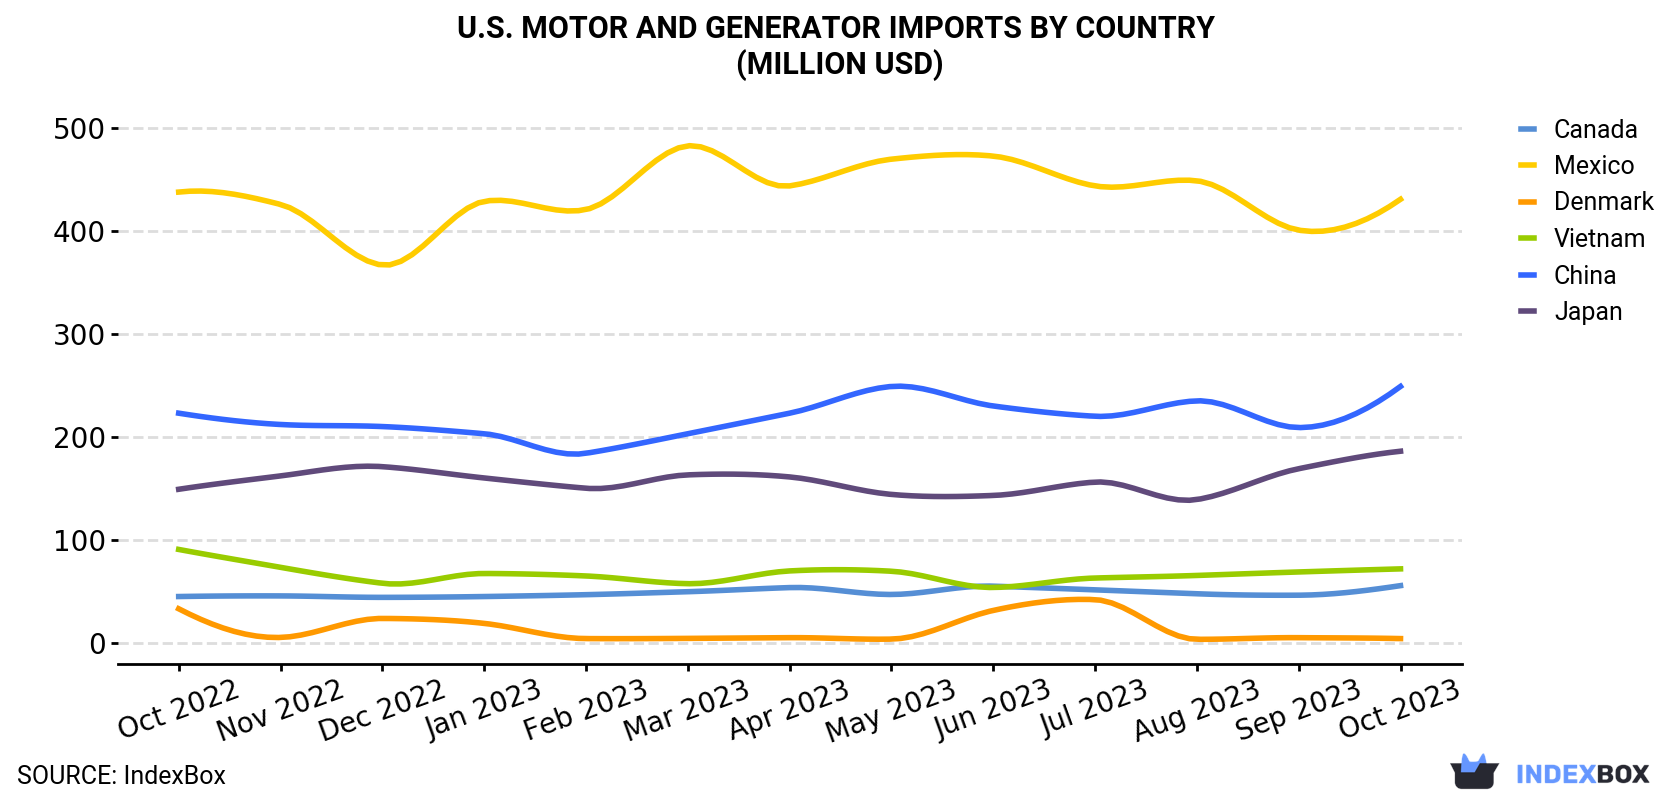 U.S. Motor And Generator Imports By Country (Million USD)